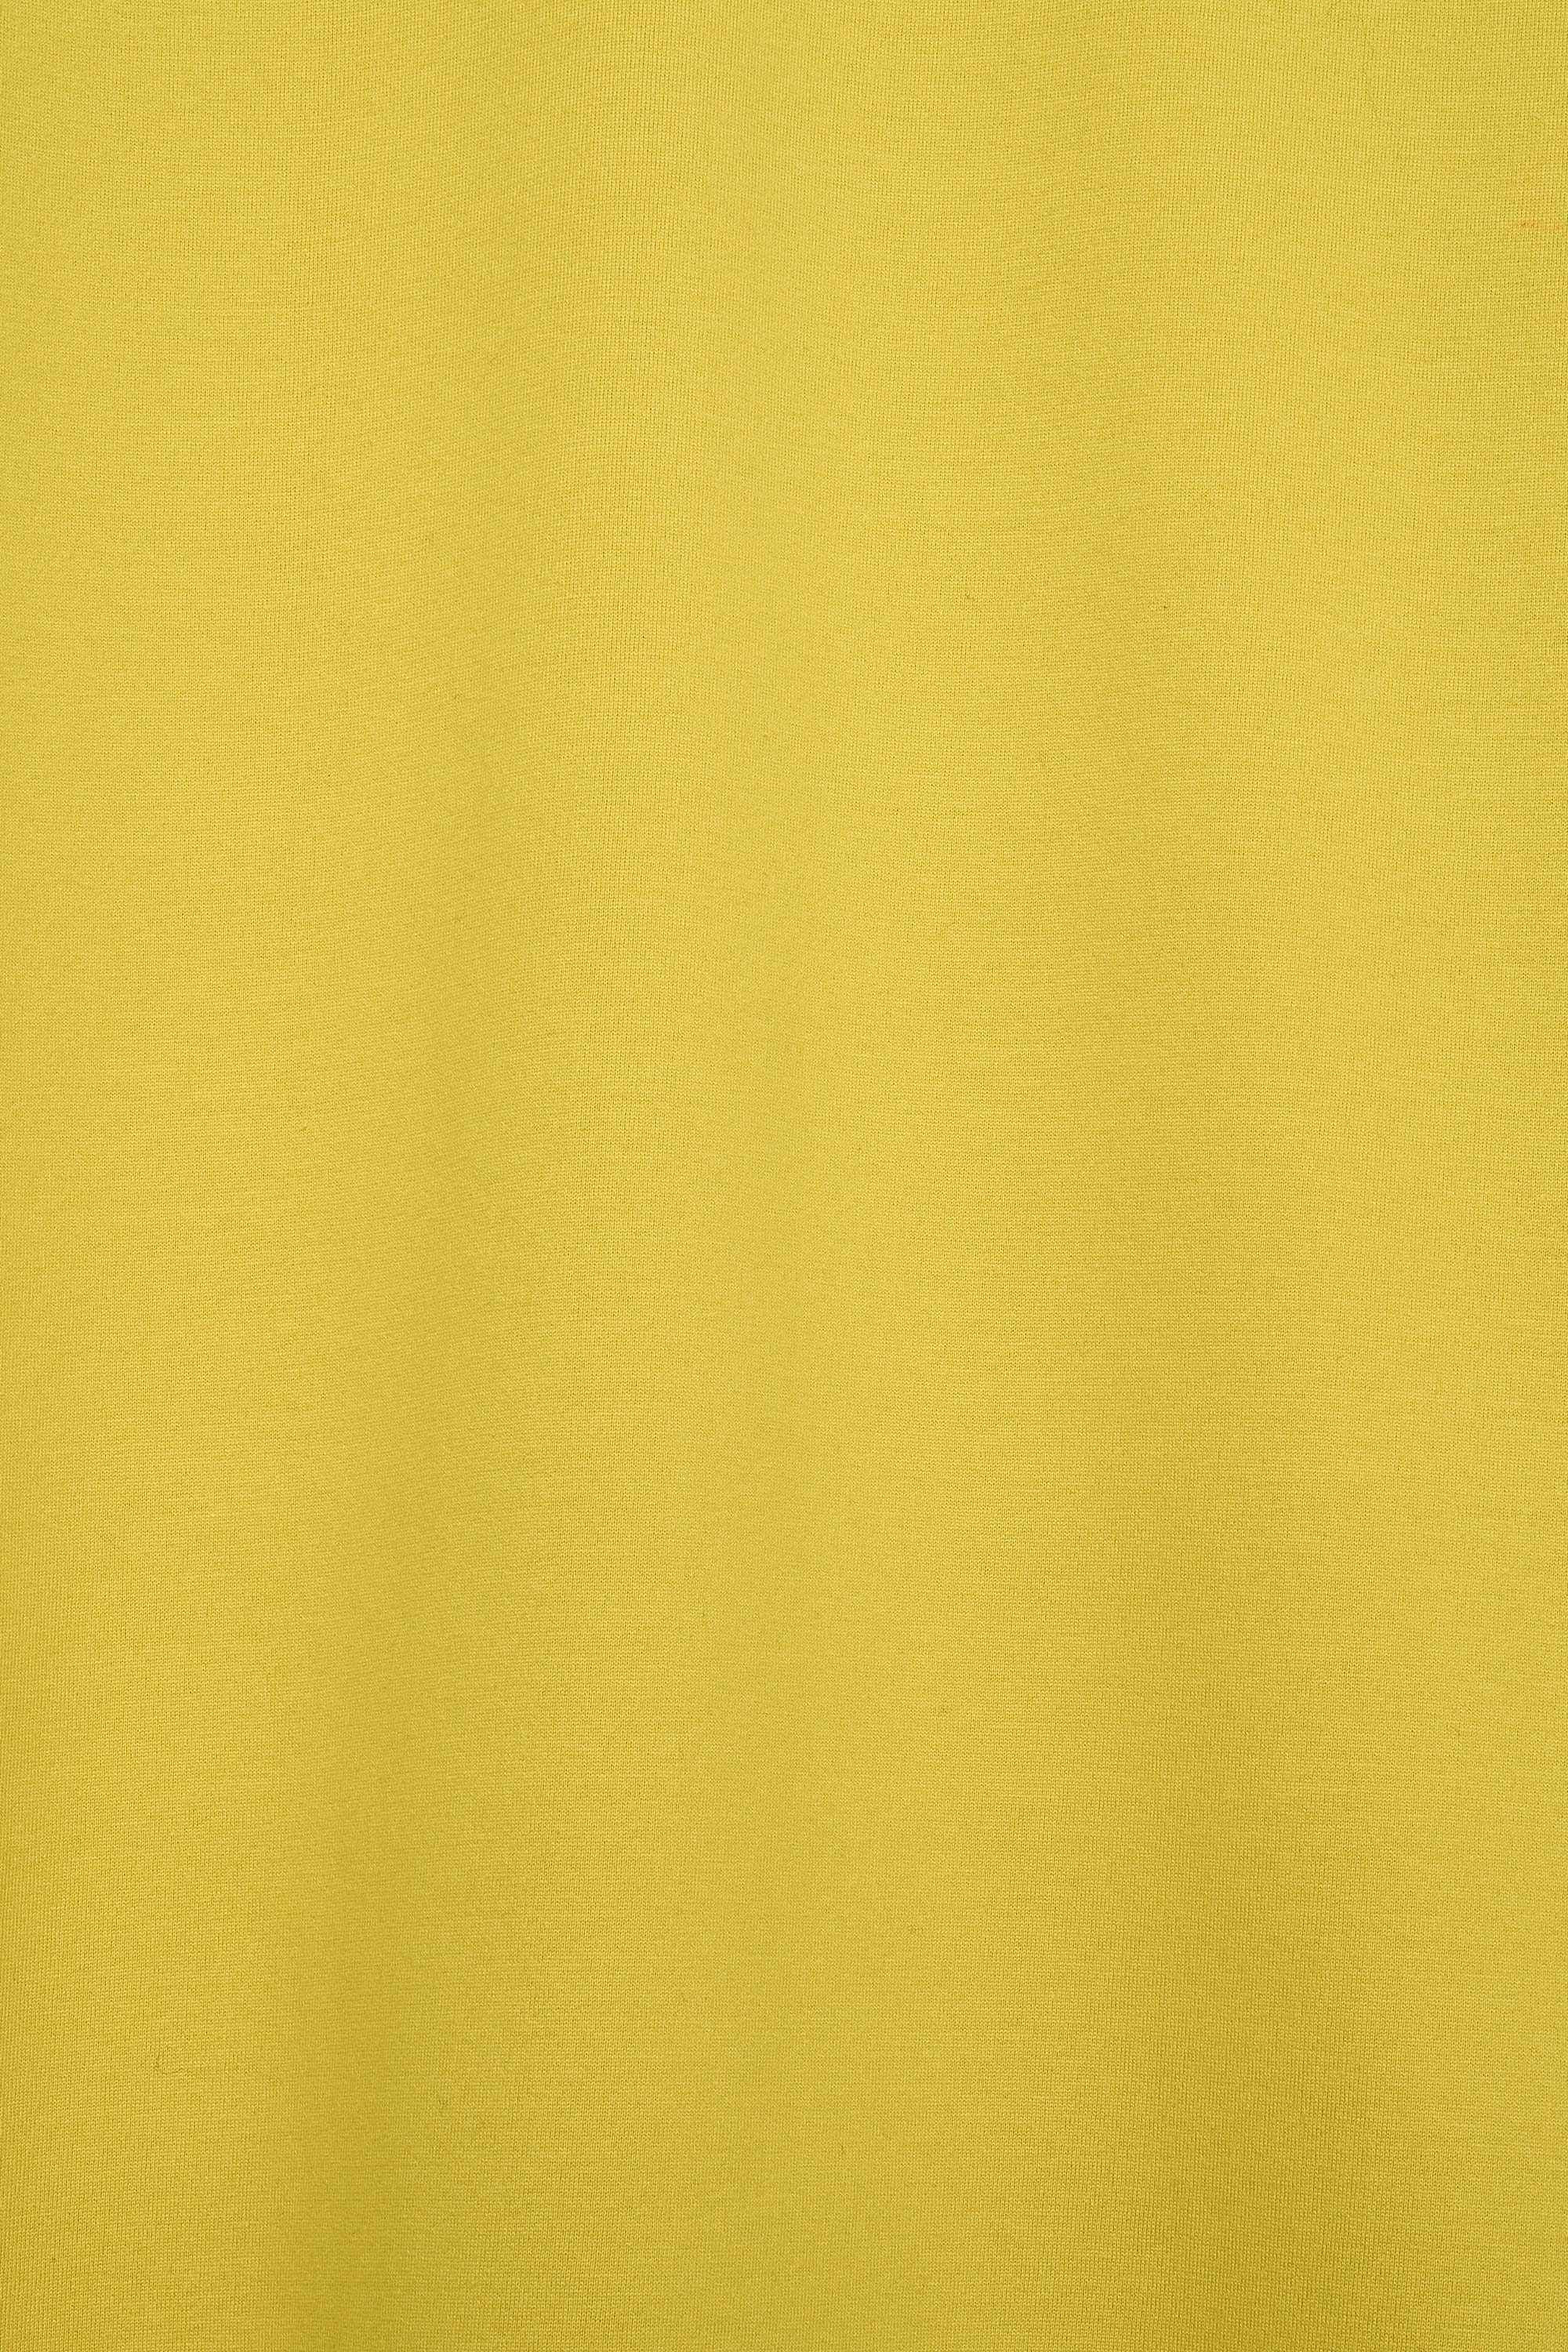 ORGANIC EGYPTIAN COTTON KNIT COMFORT FIT Tee LONG SLEEVES, Yellow